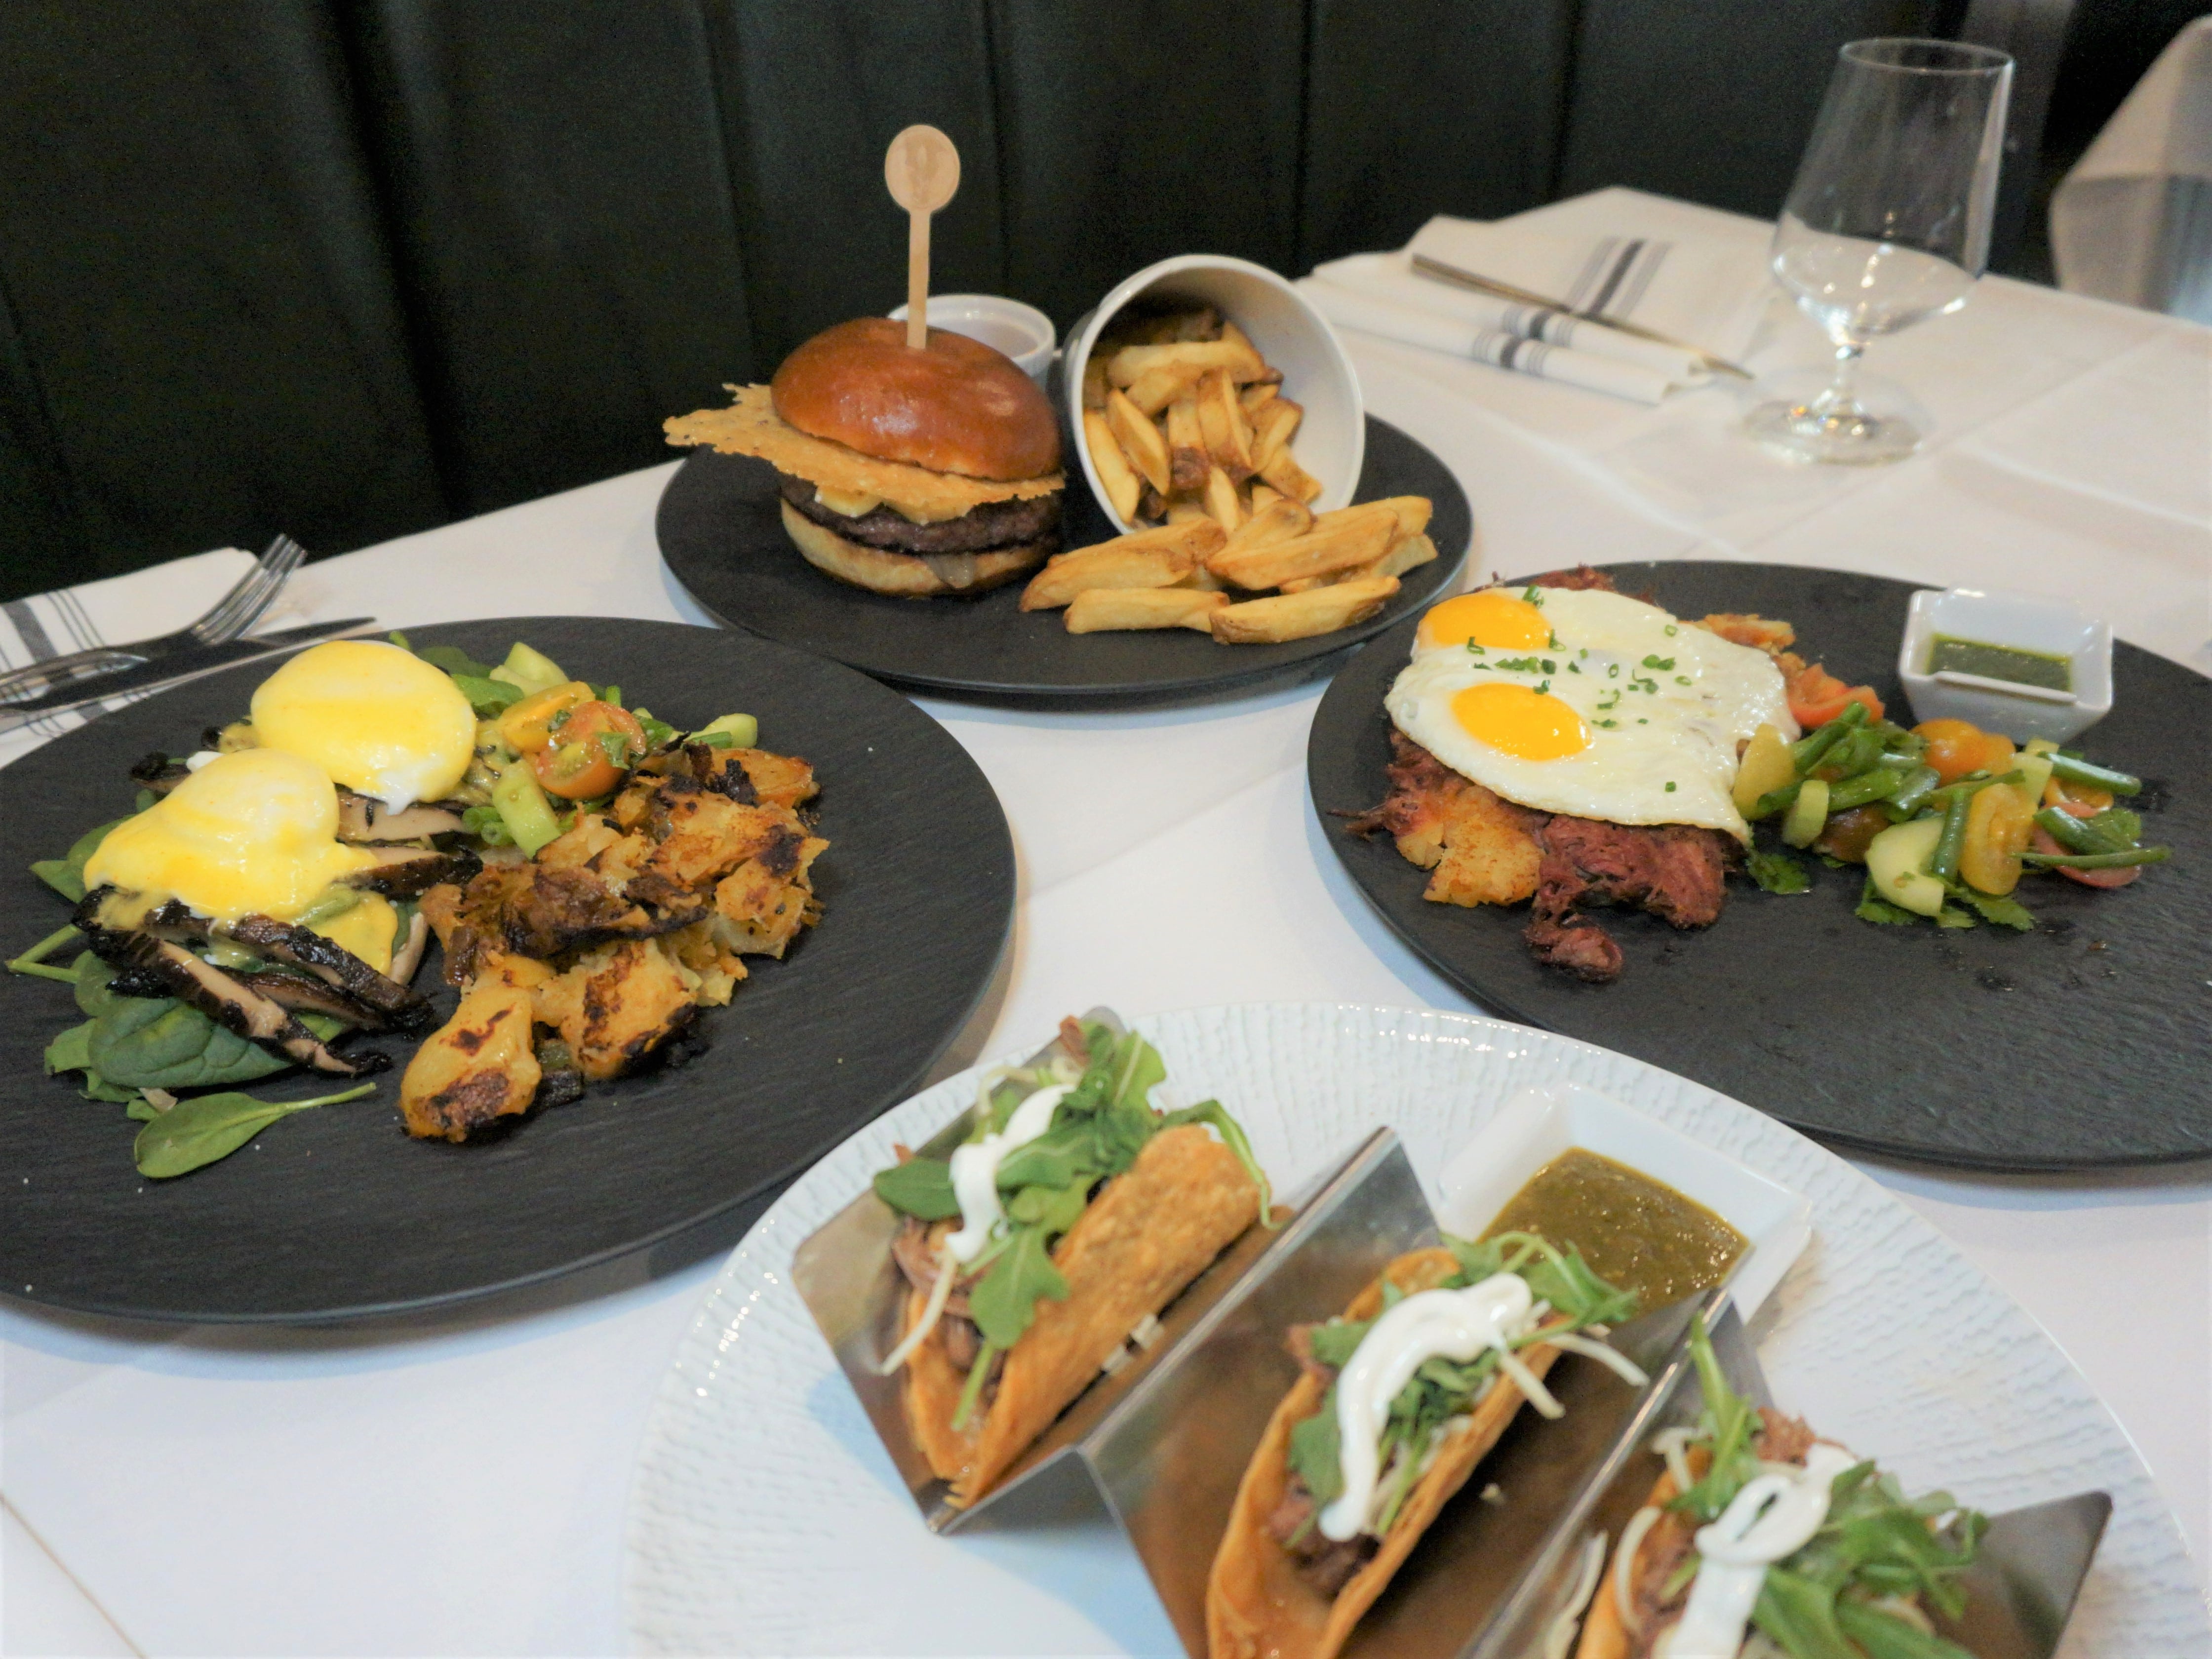 A tasty brunch spread with a burger combo, tacos, and egg dishes at 138° 